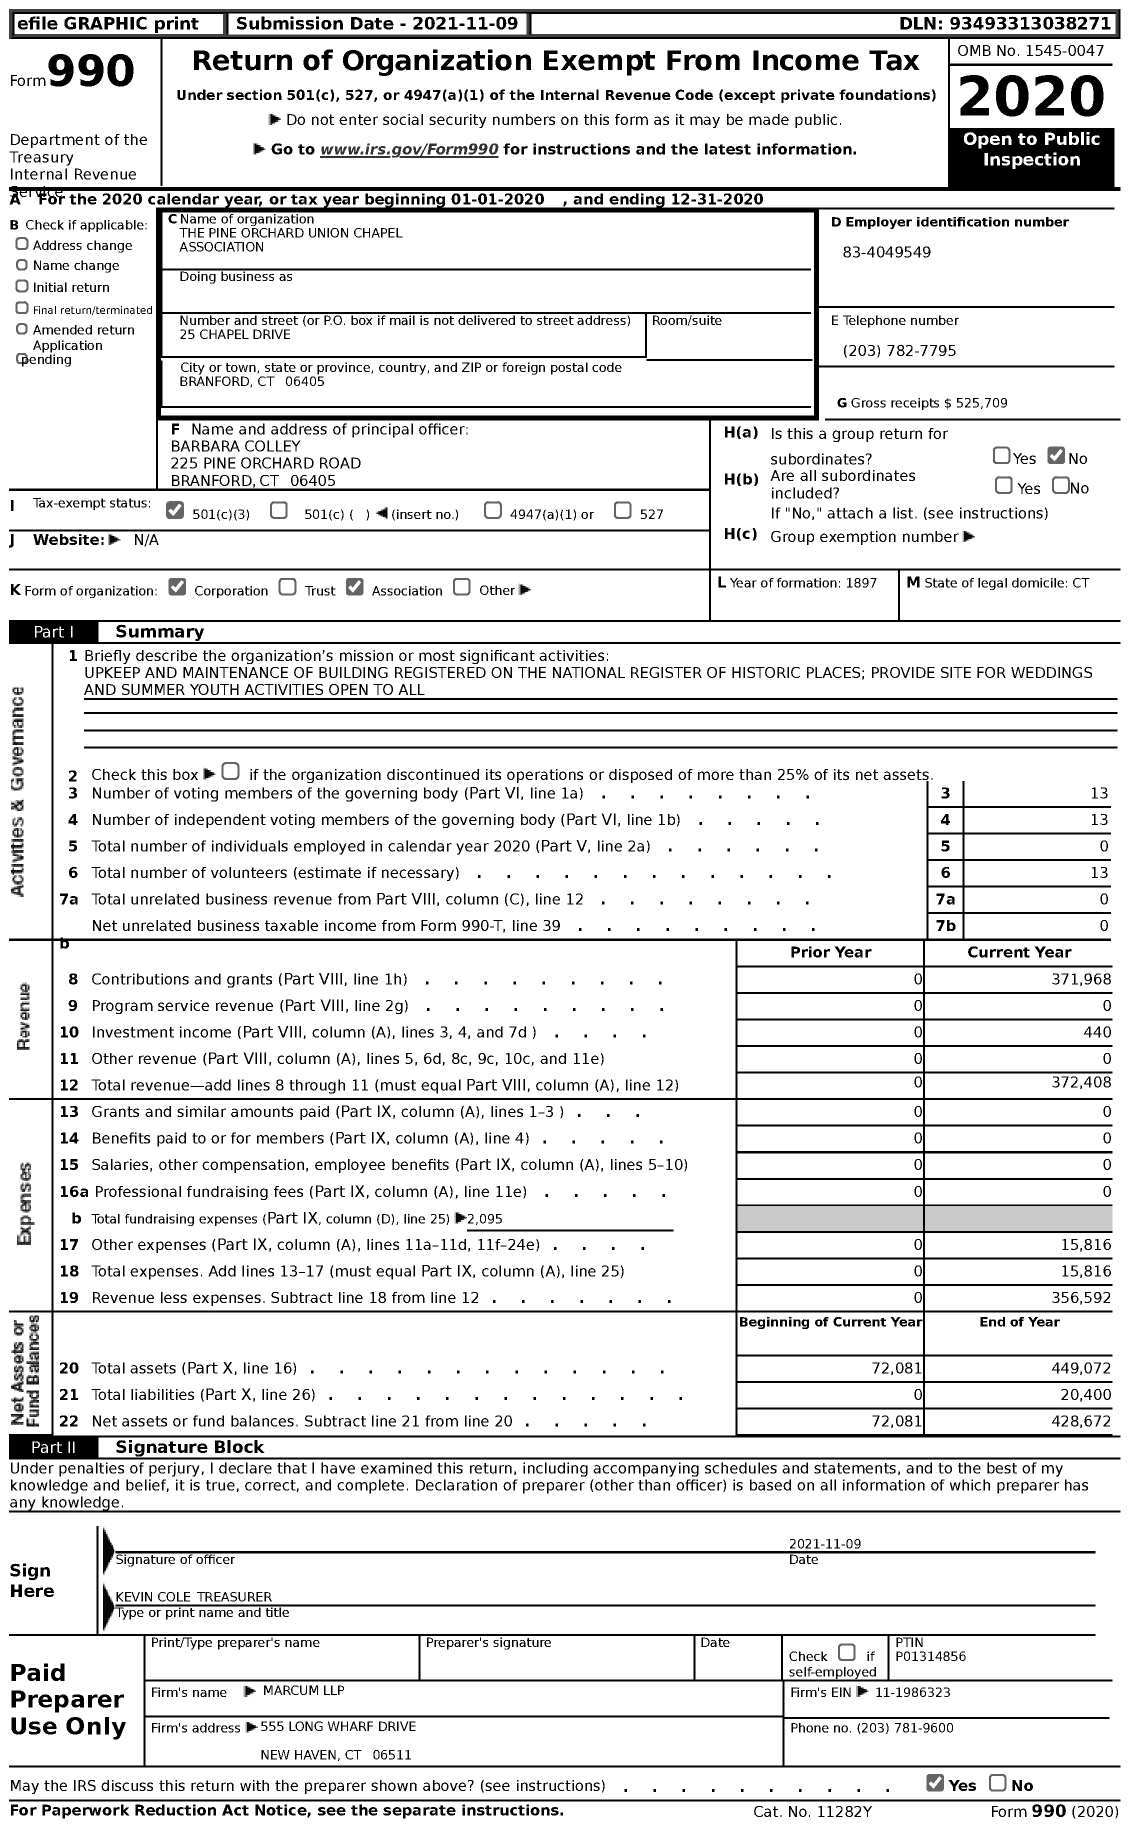 Image of first page of 2020 Form 990 for The Pine Orchard Union Chapel Association